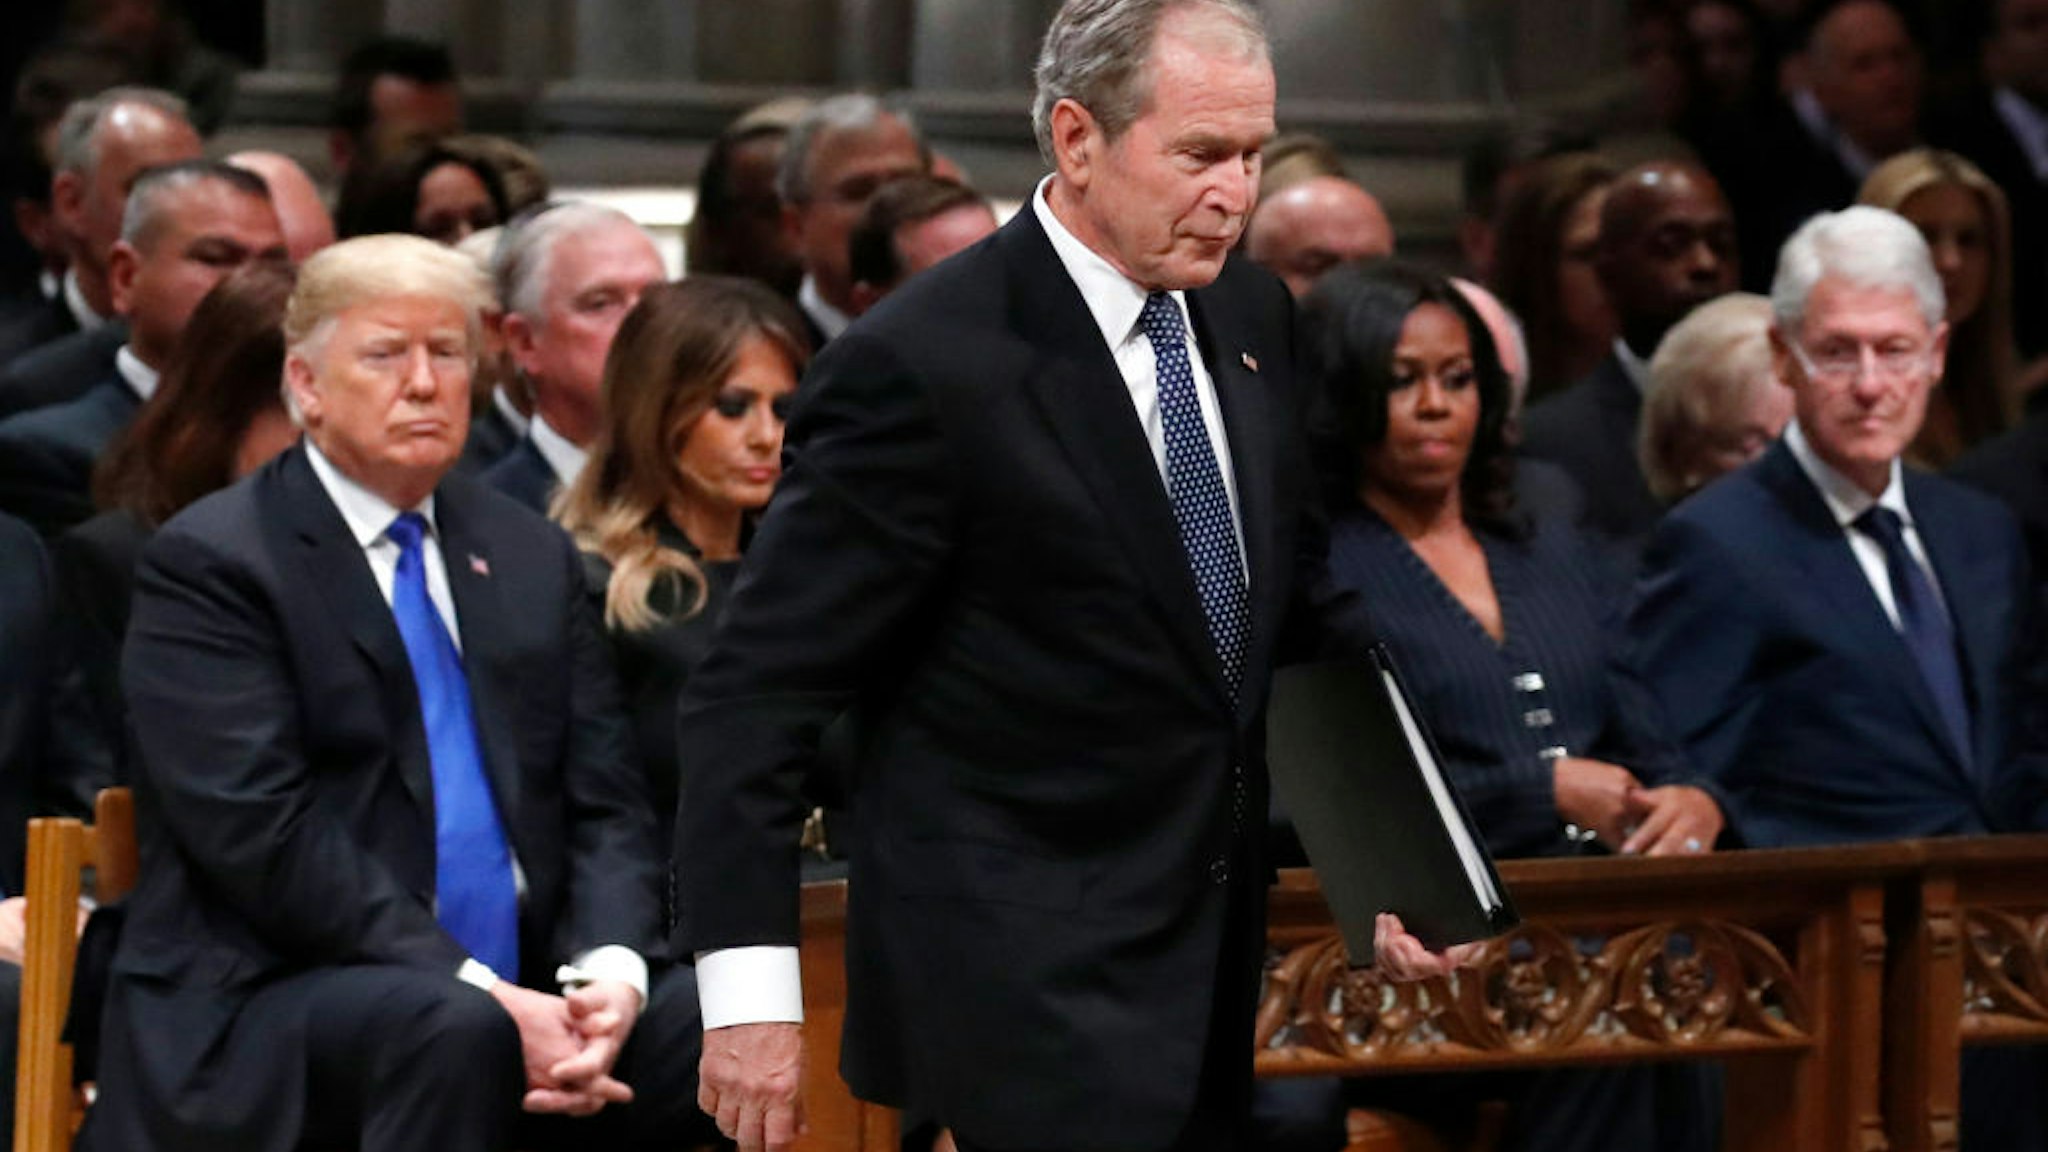 State Funeral Held For George H.W. Bush At The Washington National Cathedral